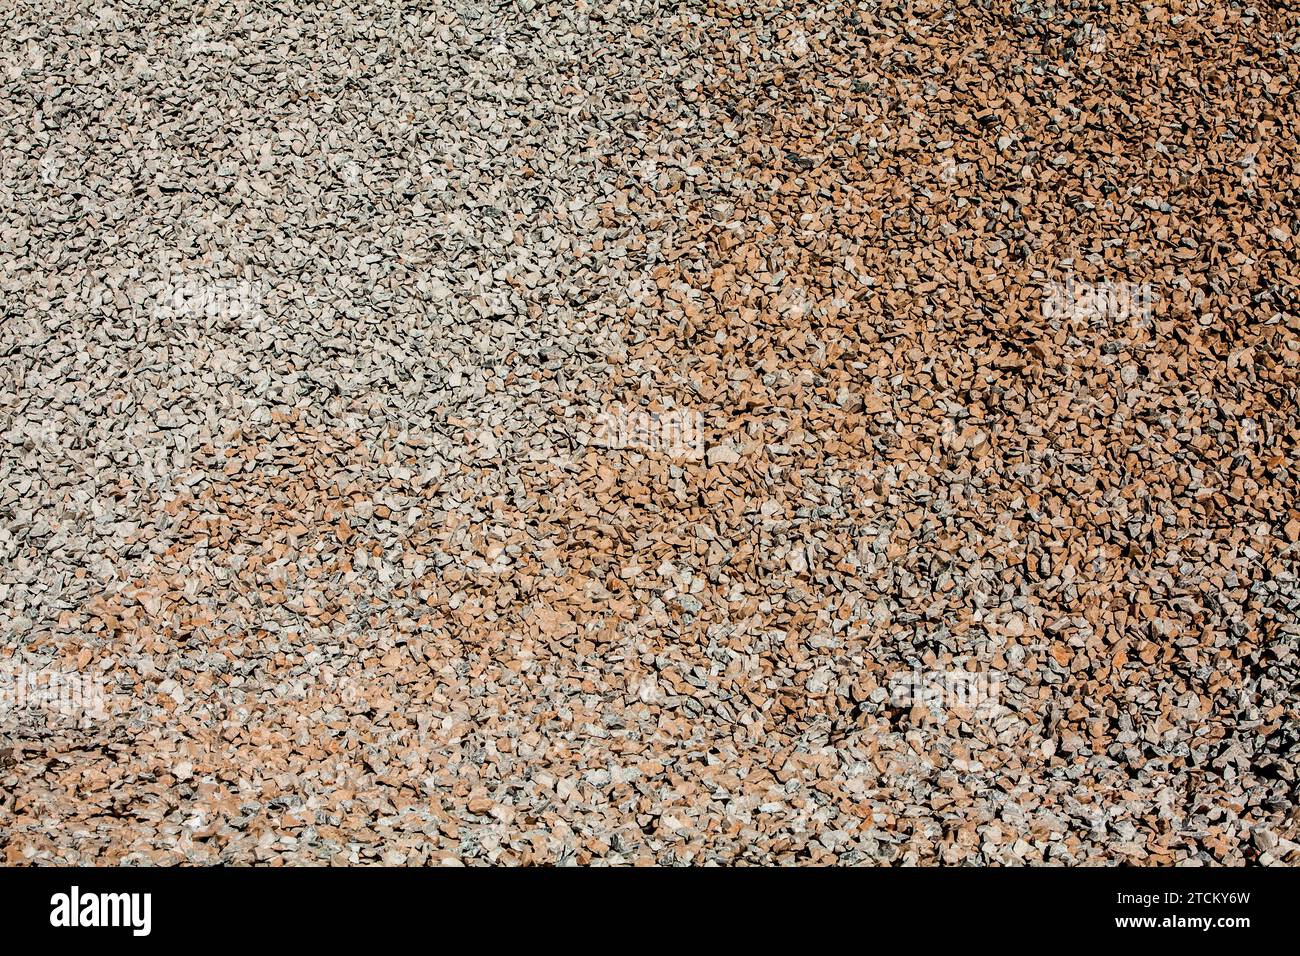 Gravel, abstract background Stock Photo